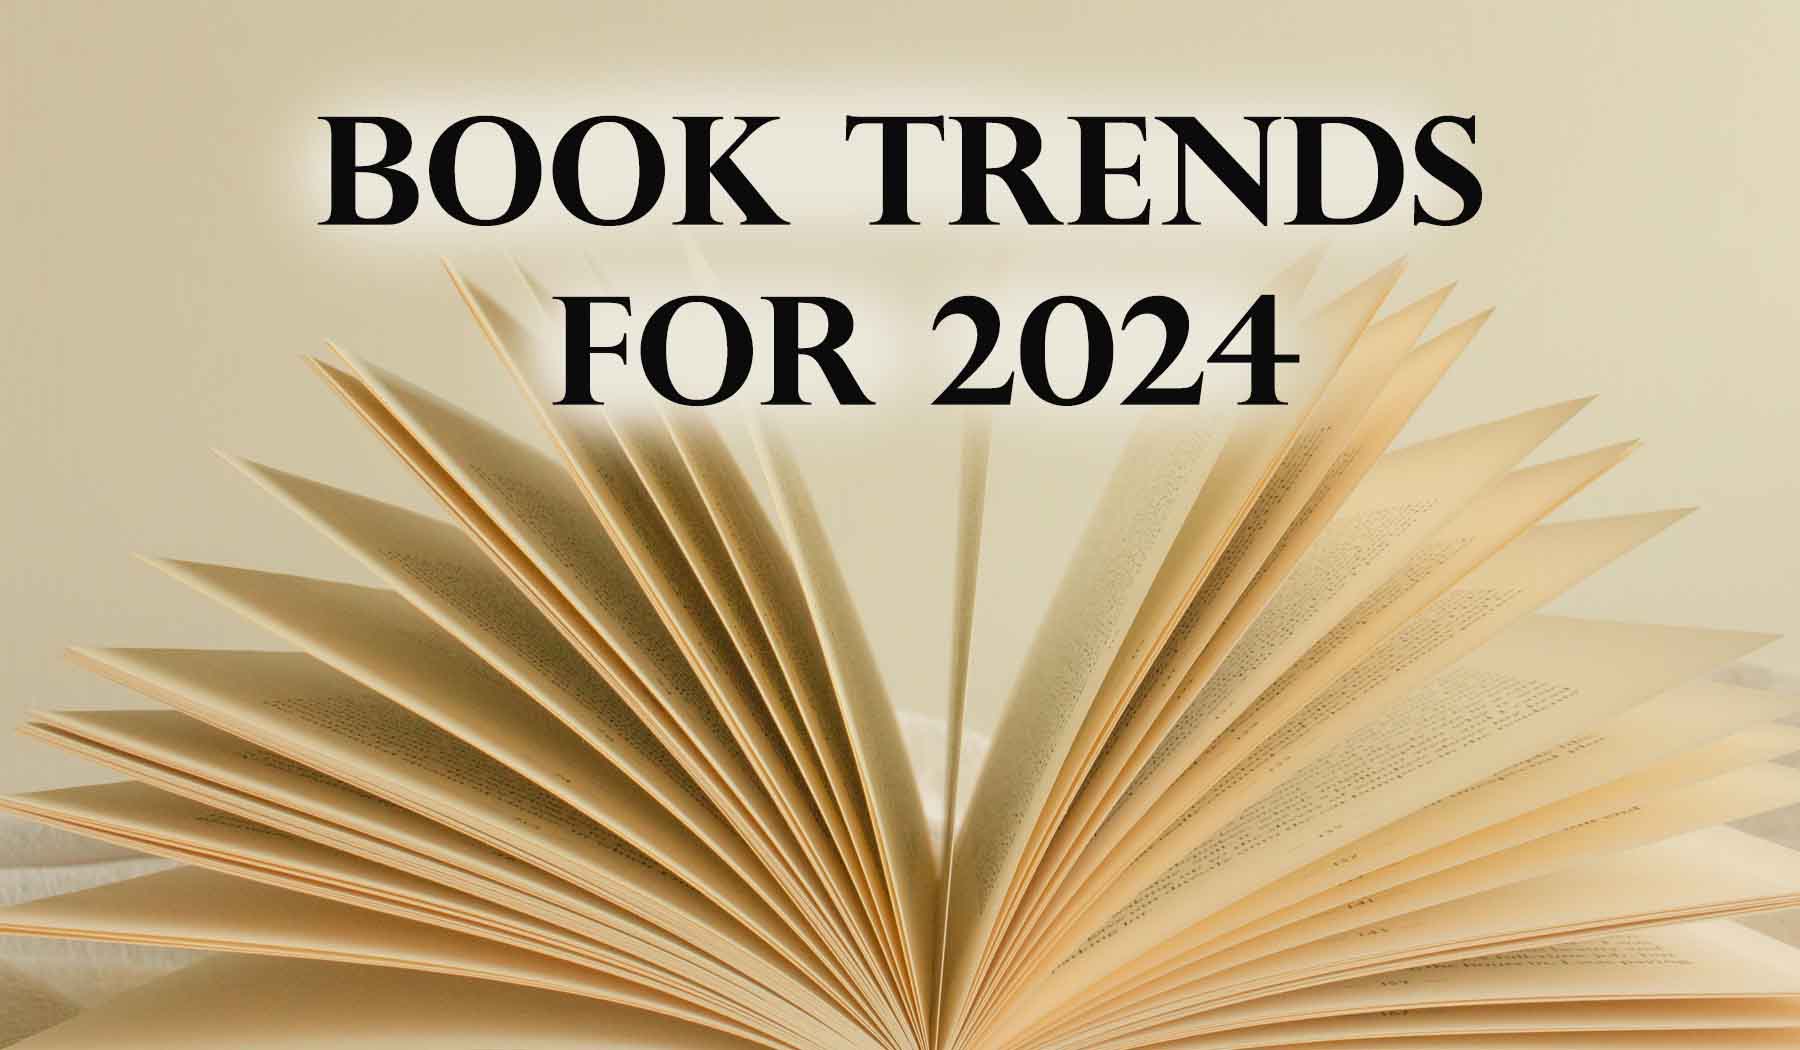 Book Trends for 2024 Vincent and Friends Media Co.